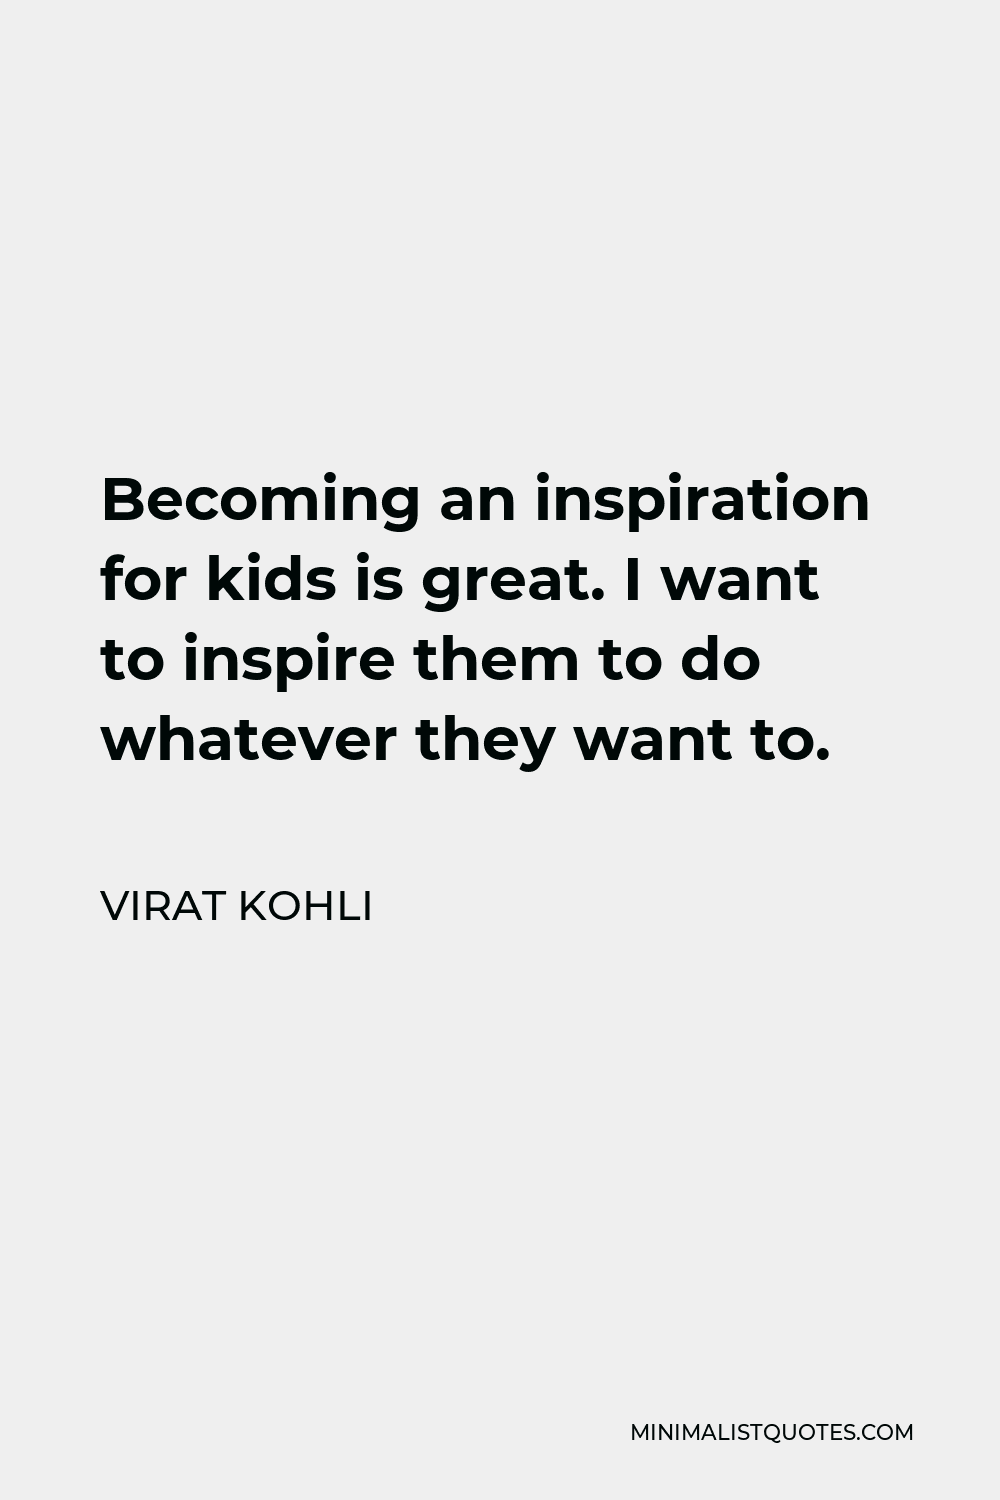 Virat Kohli Quote - Becoming an inspiration for kids is great. I want to inspire them to do whatever they want to.